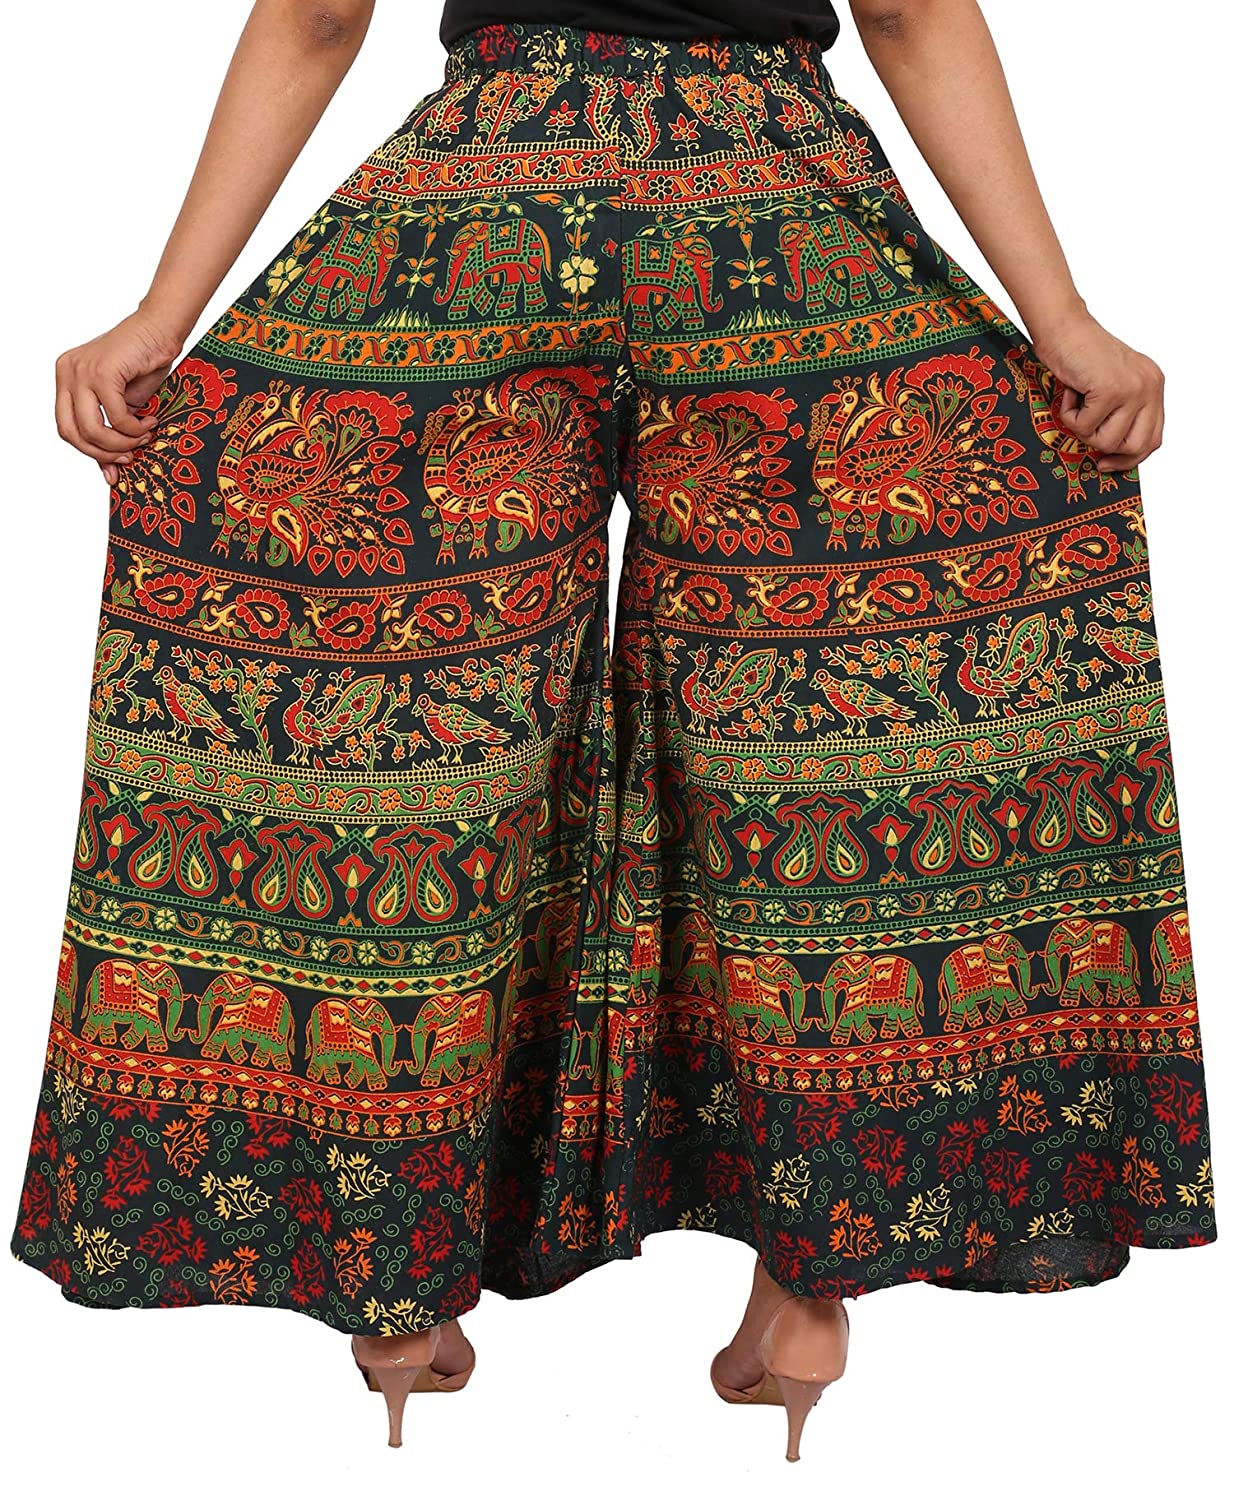 Buy Black Vogue Print Palazzo Pants at Social Butterfly Collection for only  $ 89.00